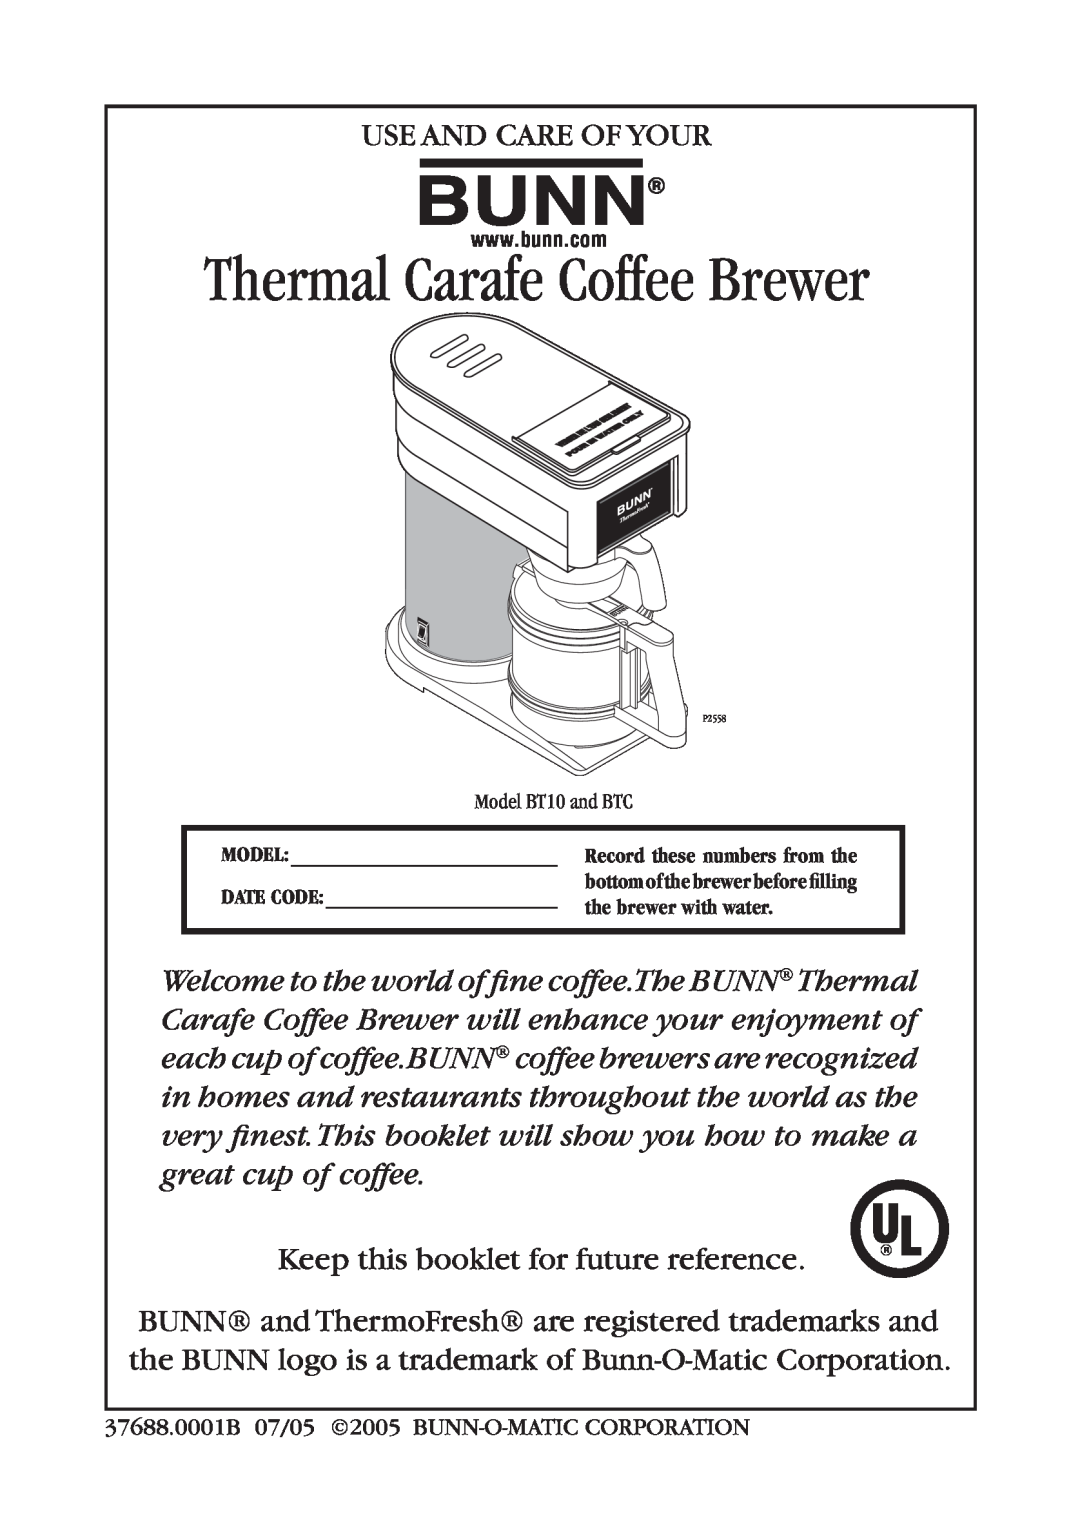 Bunn BTC, BT10 manual Thermal Carafe Coffee Brewer, Keep this booklet for future reference 